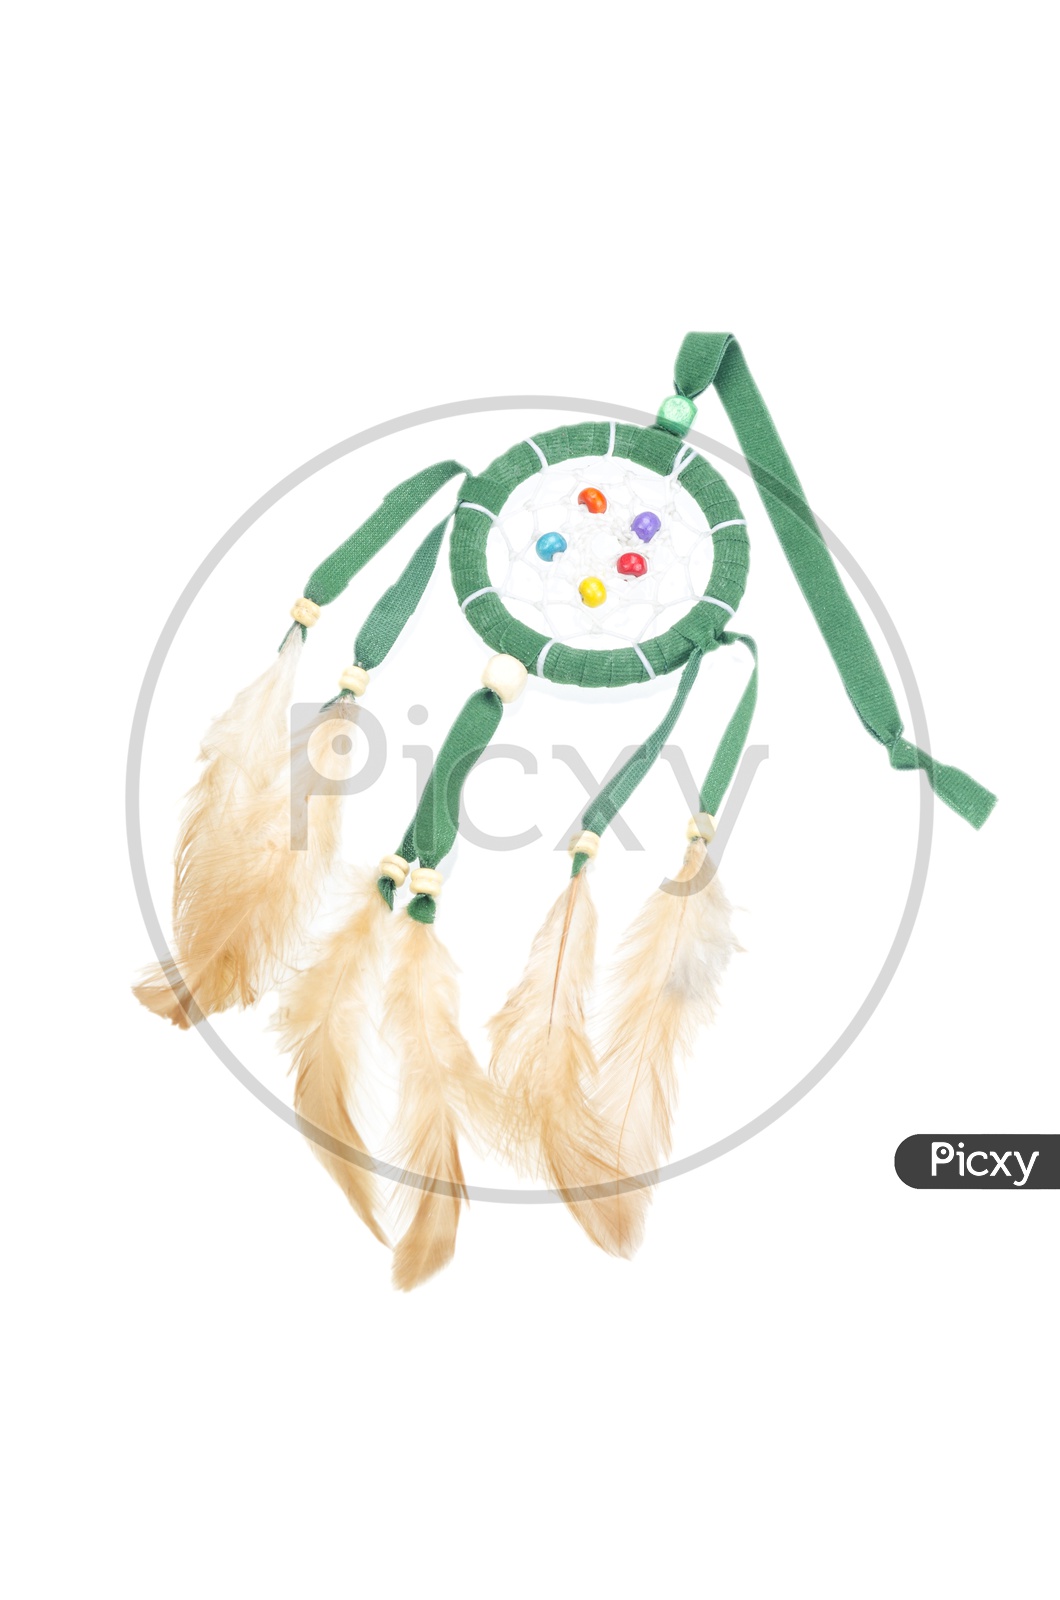 Beautiful dream catcher isolated on white with clipping path